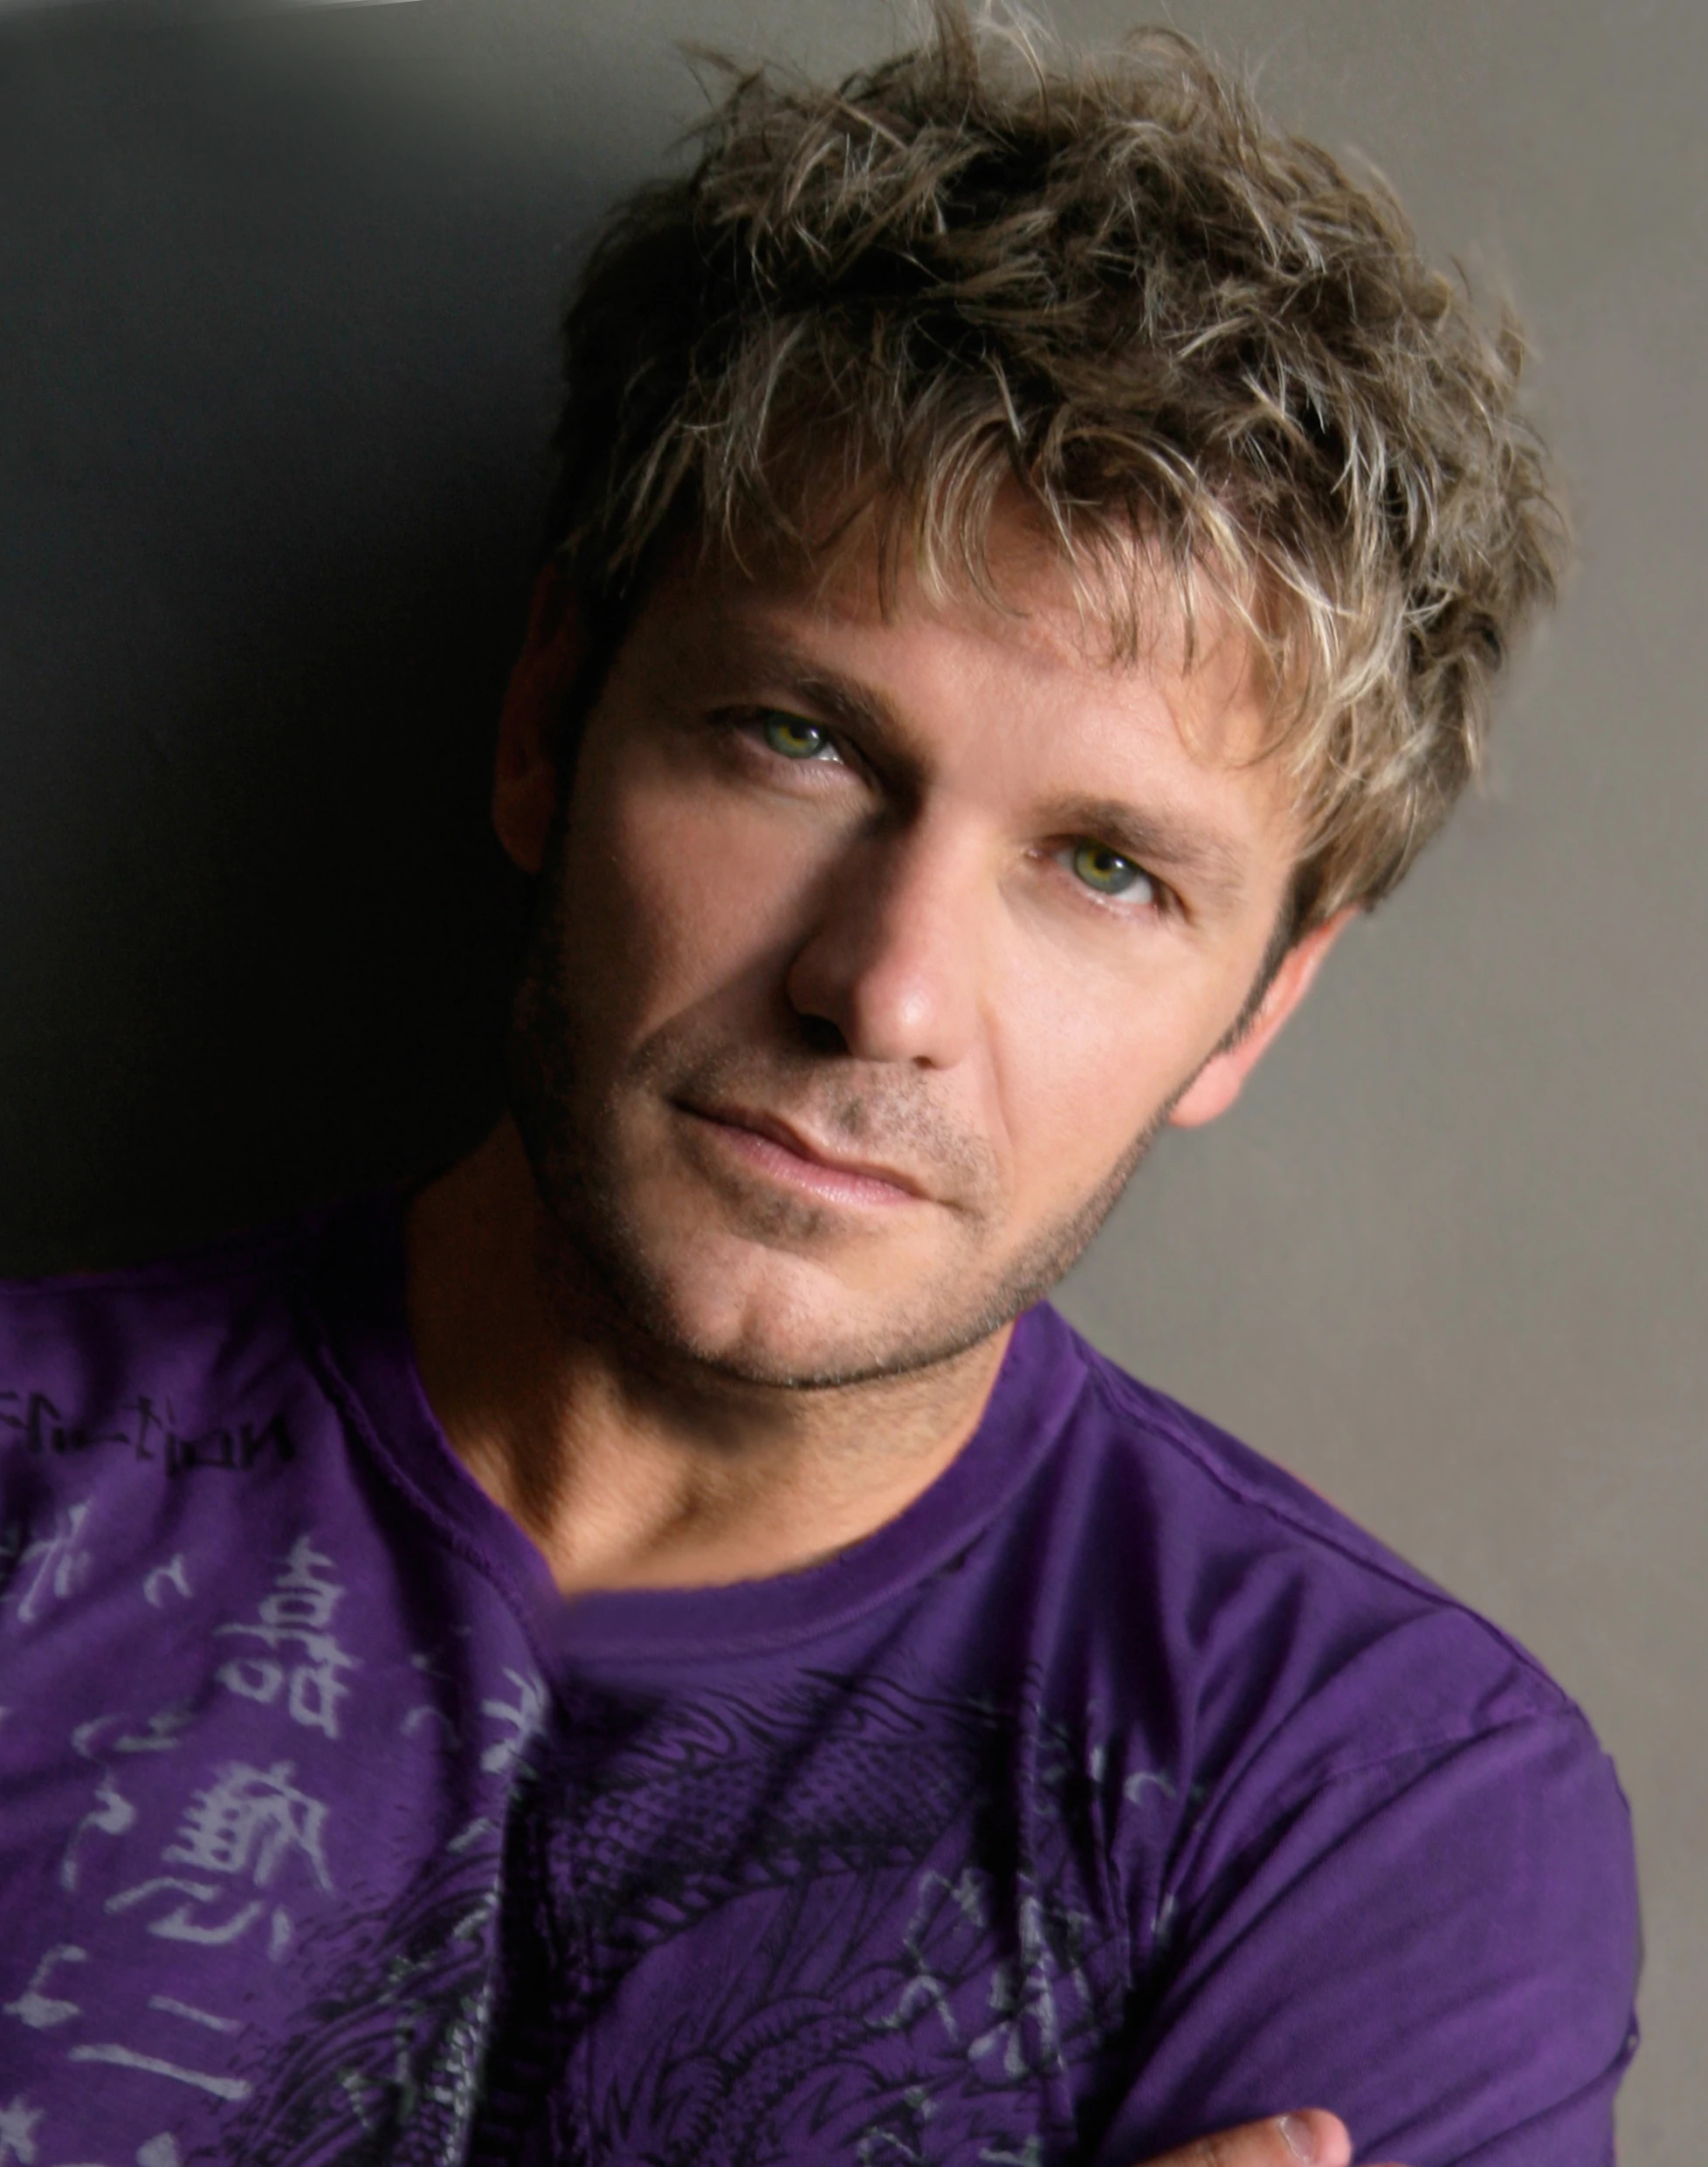 Vic Mignogna KICKED from SacAnime Con! This Anime VA is BLACKLISTED?!